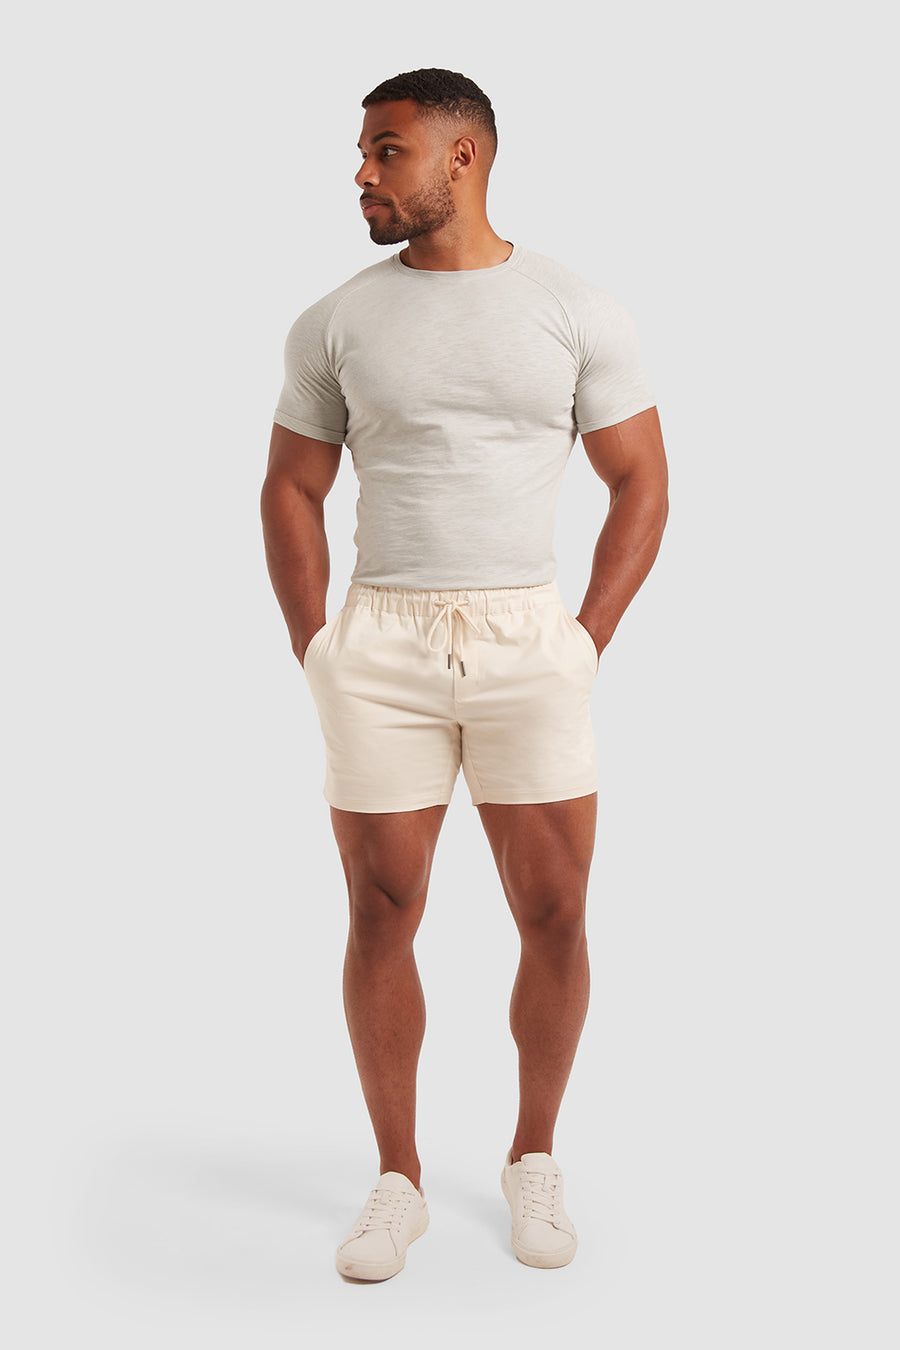 Athletic Fit Drawstring Chino Shorts in Chalk - TAILORED ATHLETE - USA